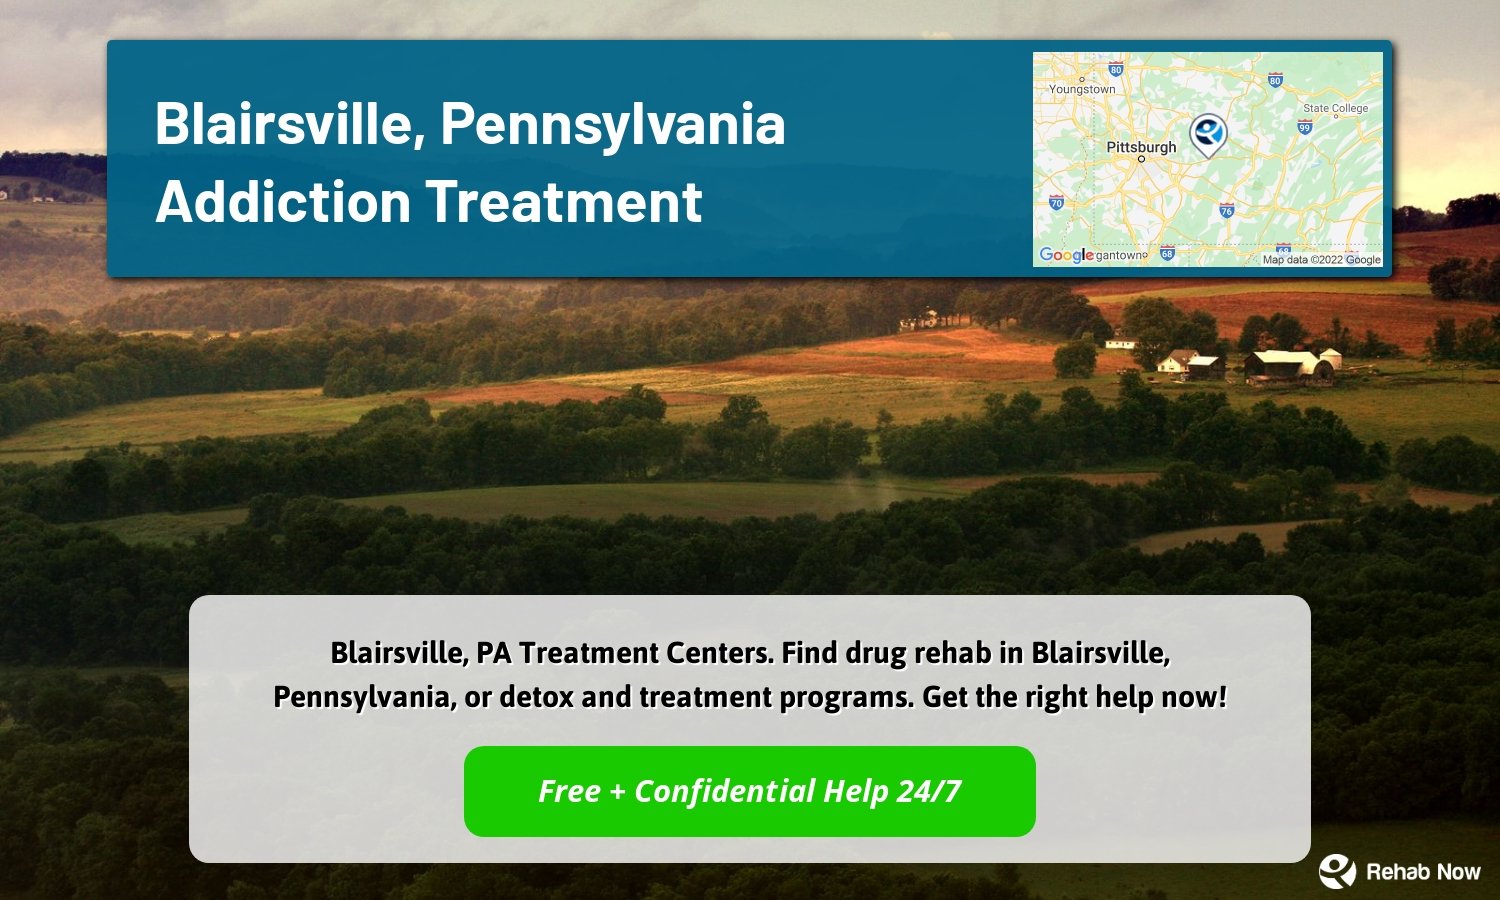 Blairsville, PA Treatment Centers. Find drug rehab in Blairsville, Pennsylvania, or detox and treatment programs. Get the right help now!